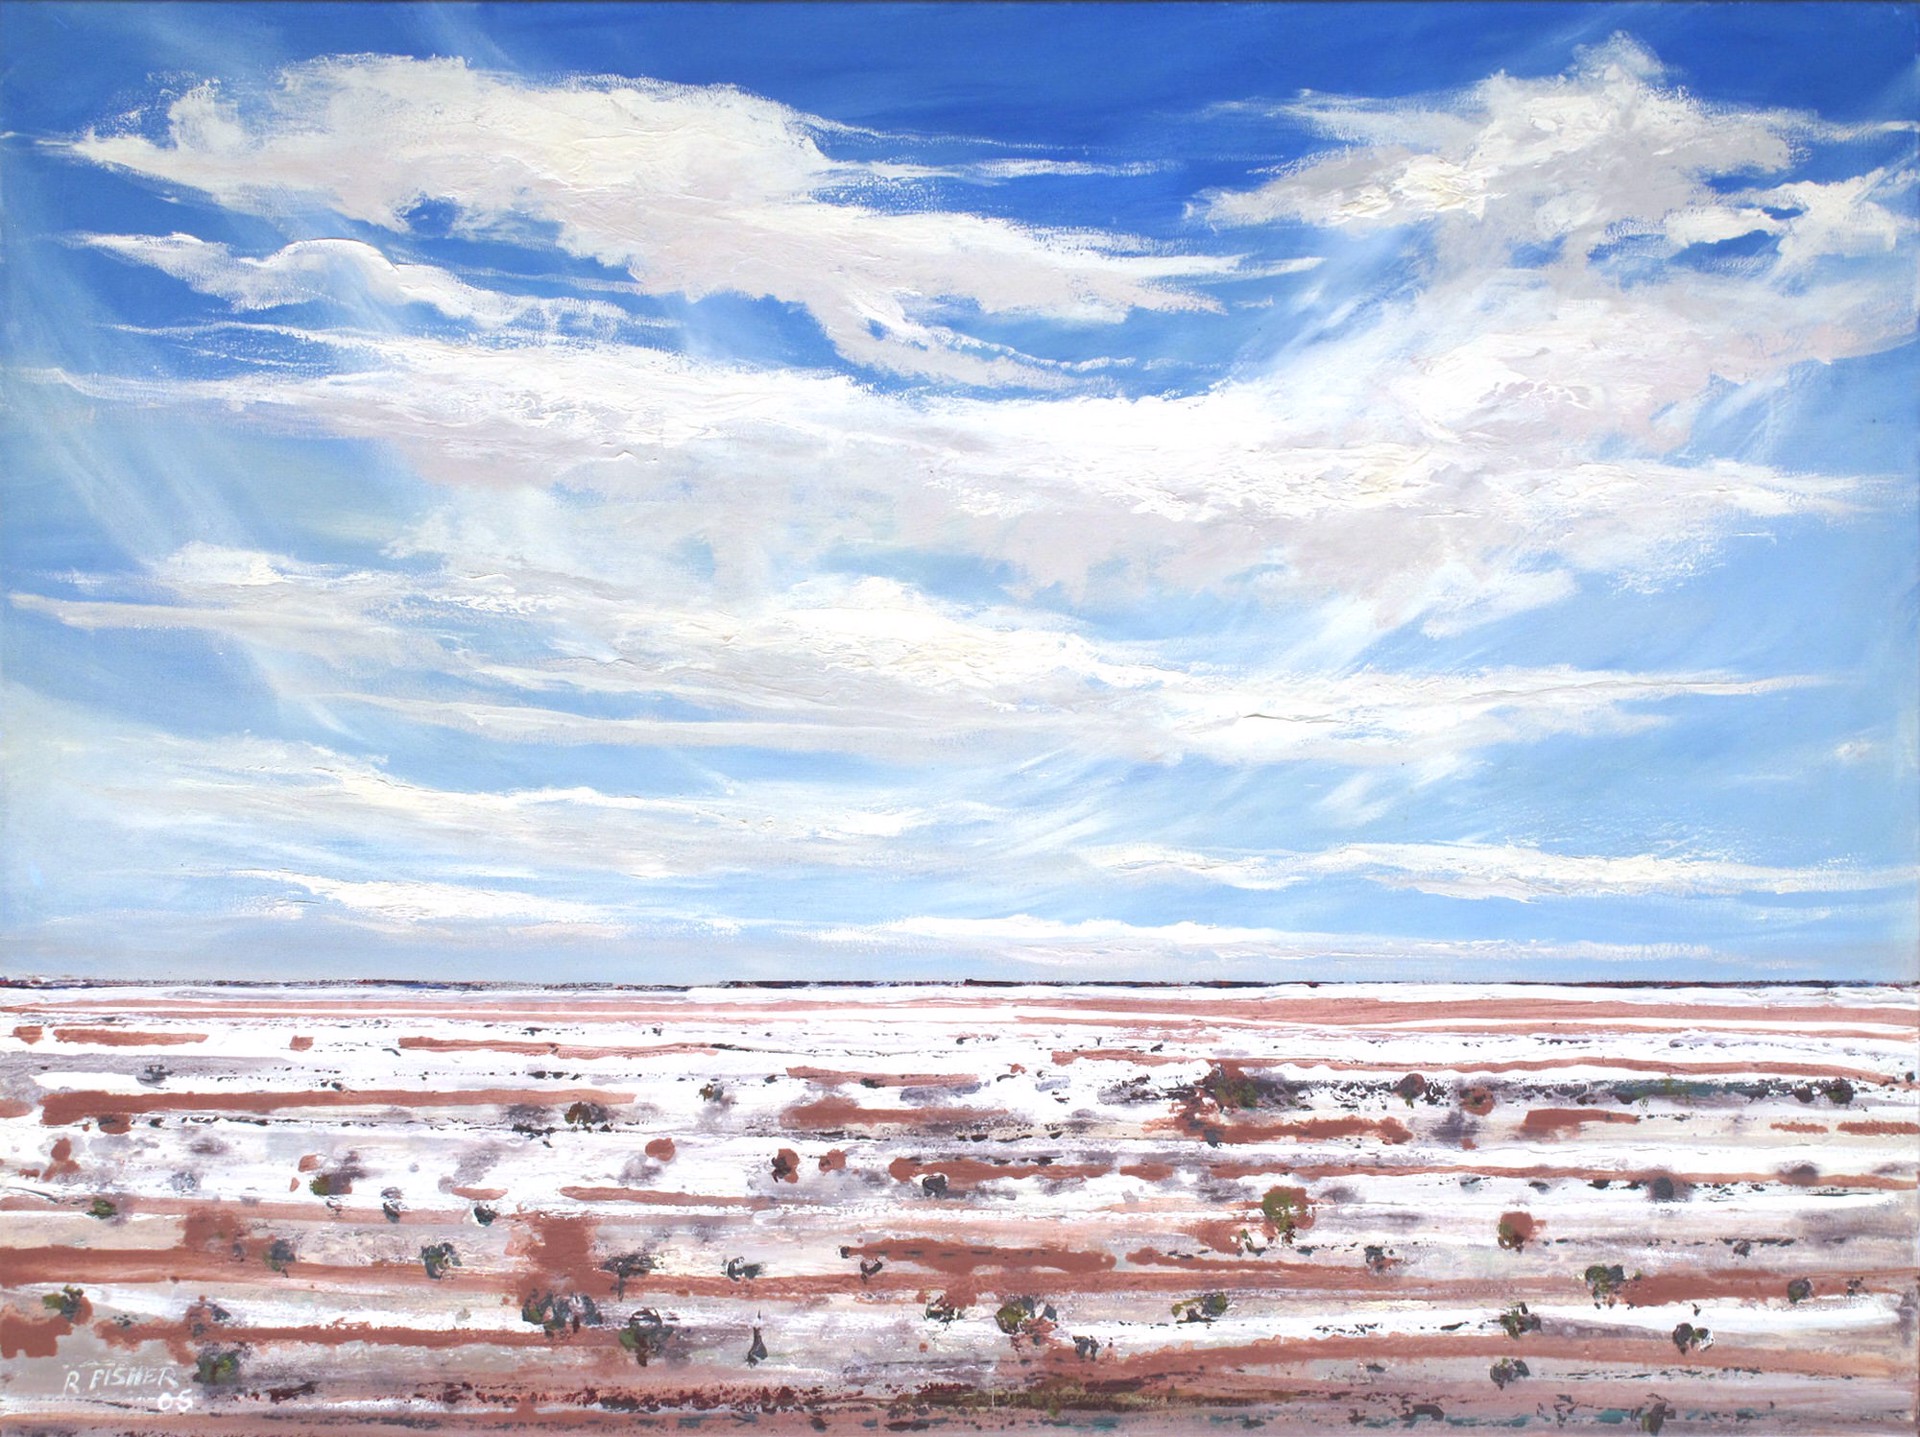 Lake Eyre - A Geologist Trek by Robert Fisher